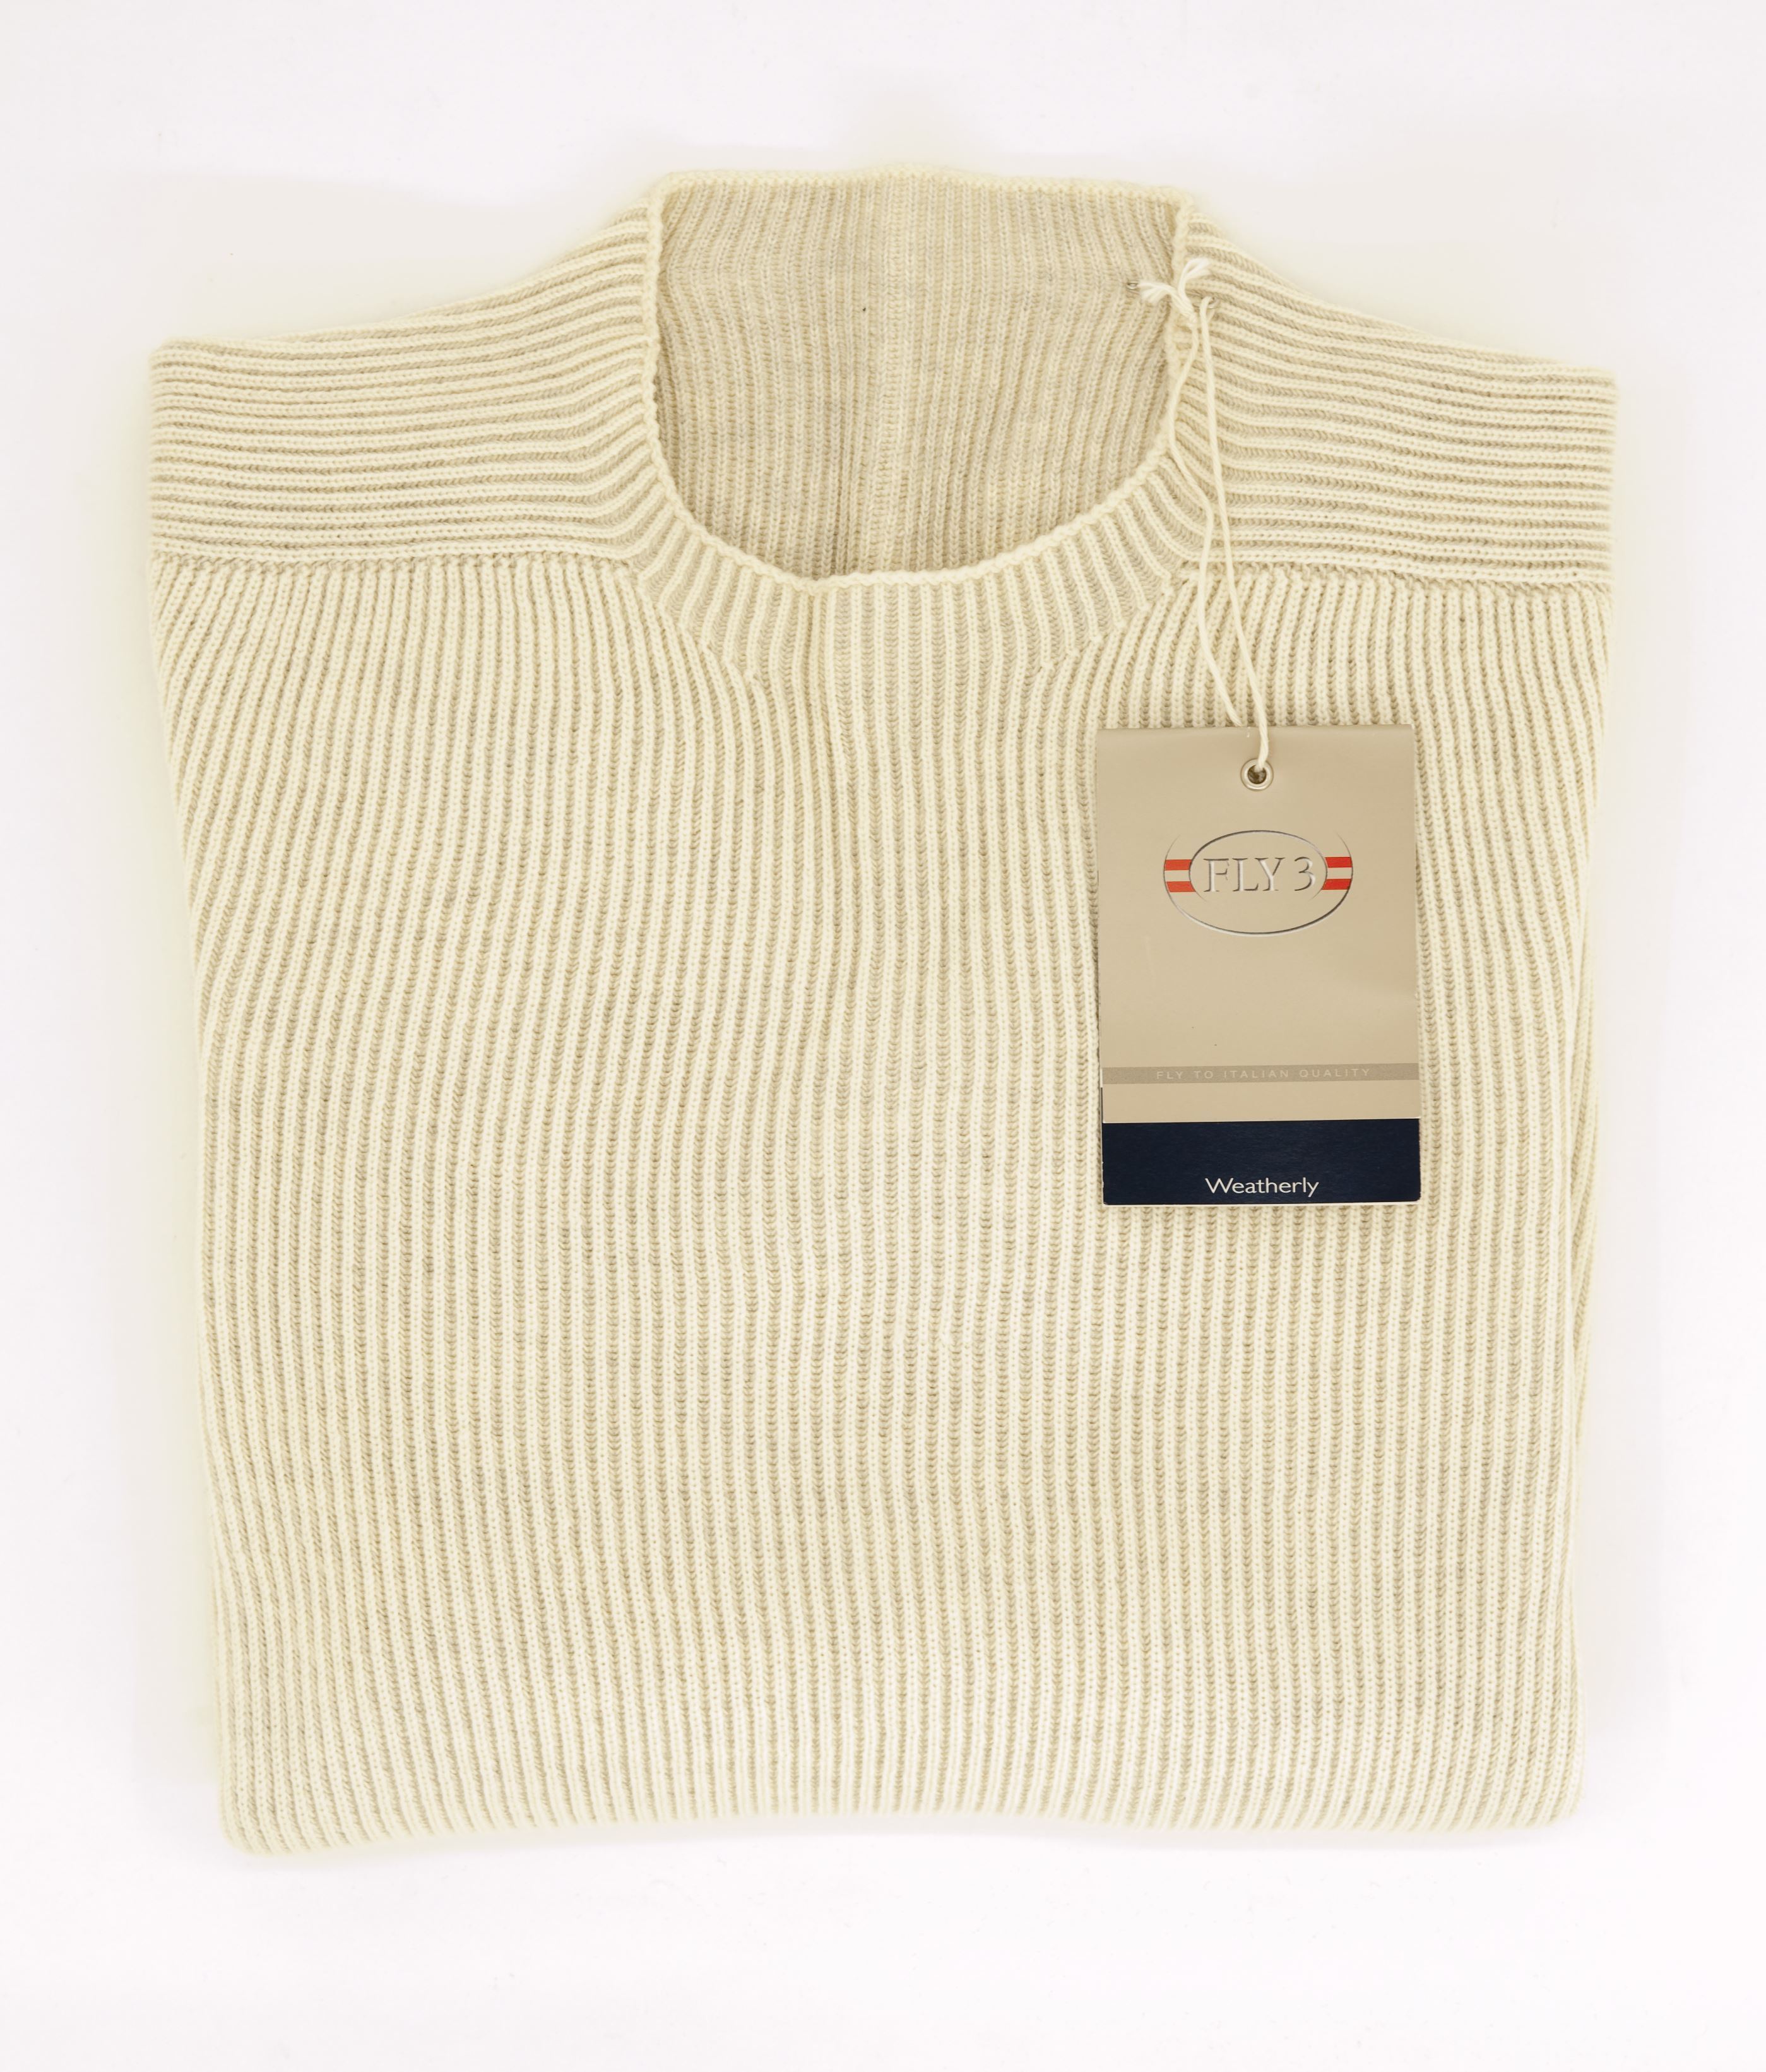 Picture of Fly3 WEATHERLY CREW NECK RIB KNITTED REVERSABLE SWEATER